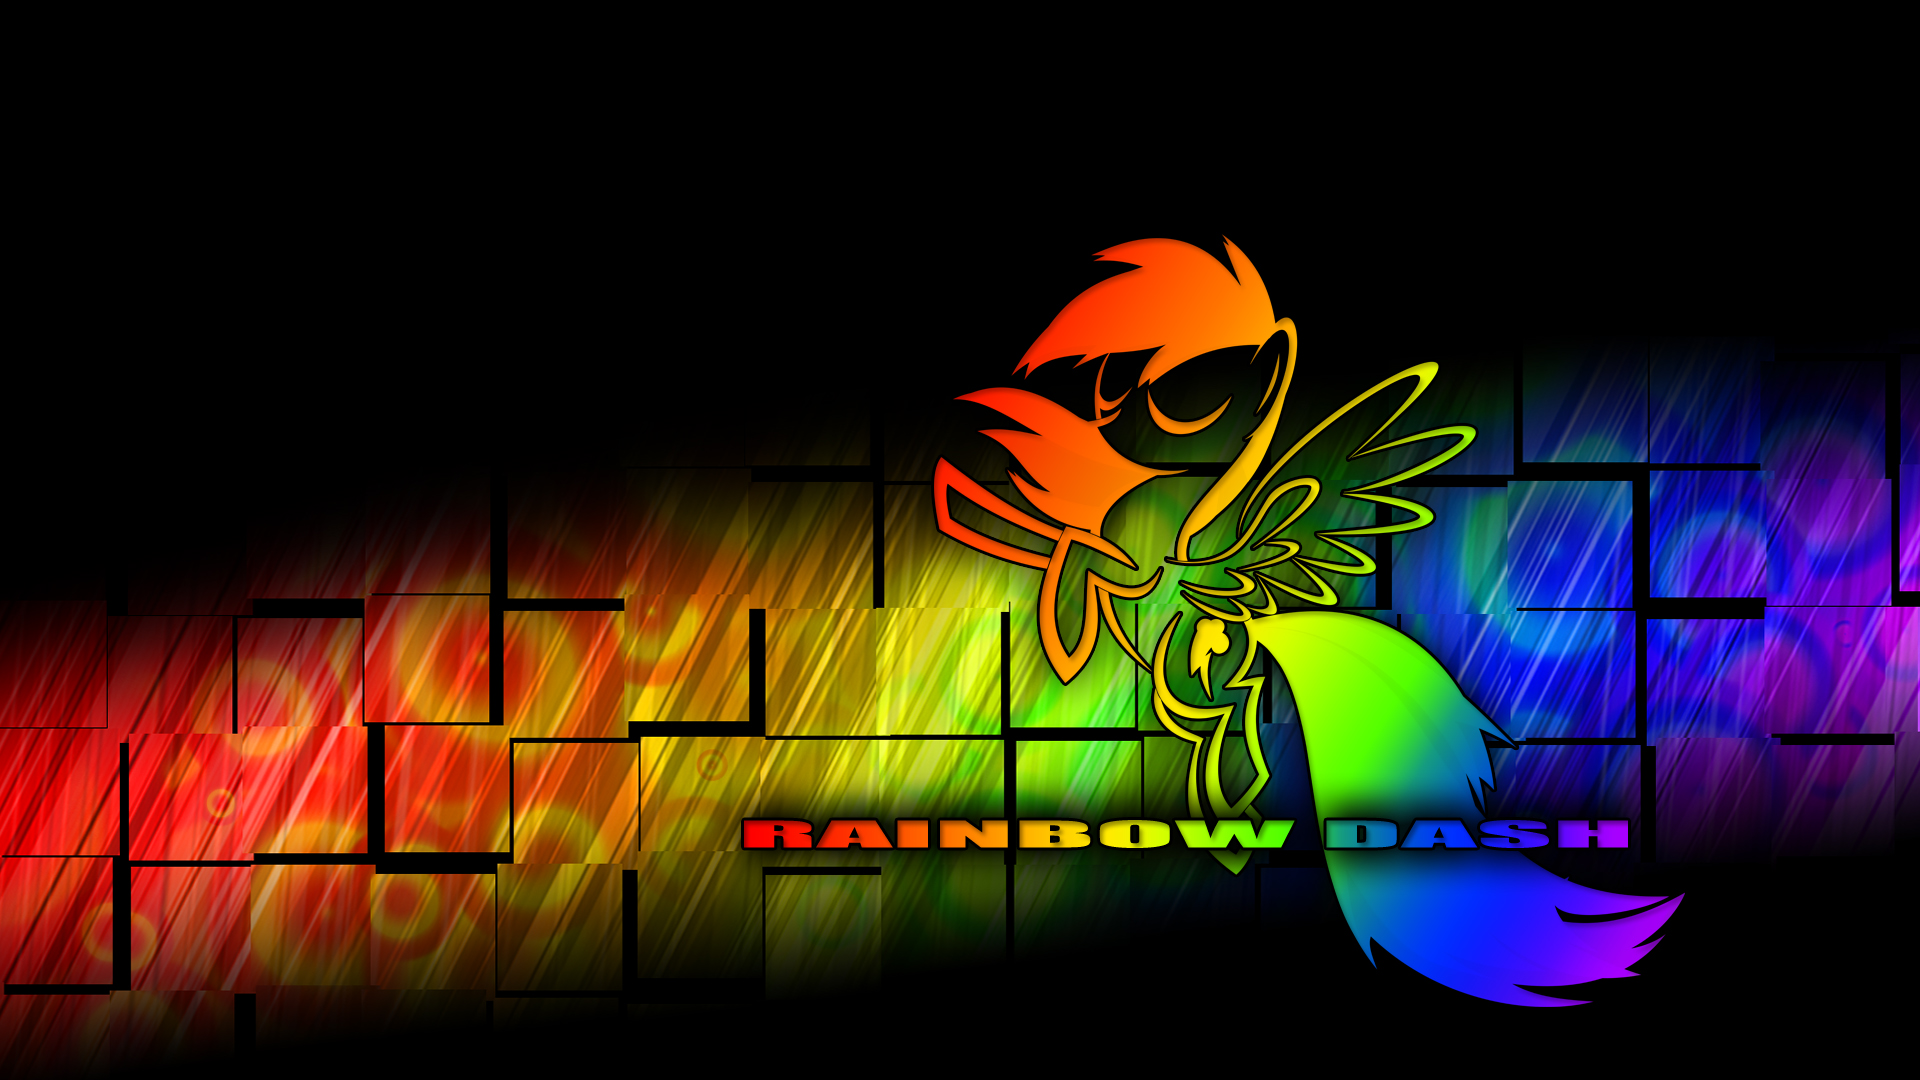 Rainbow Dash Wallpaper by Pappkarton and UP1TER